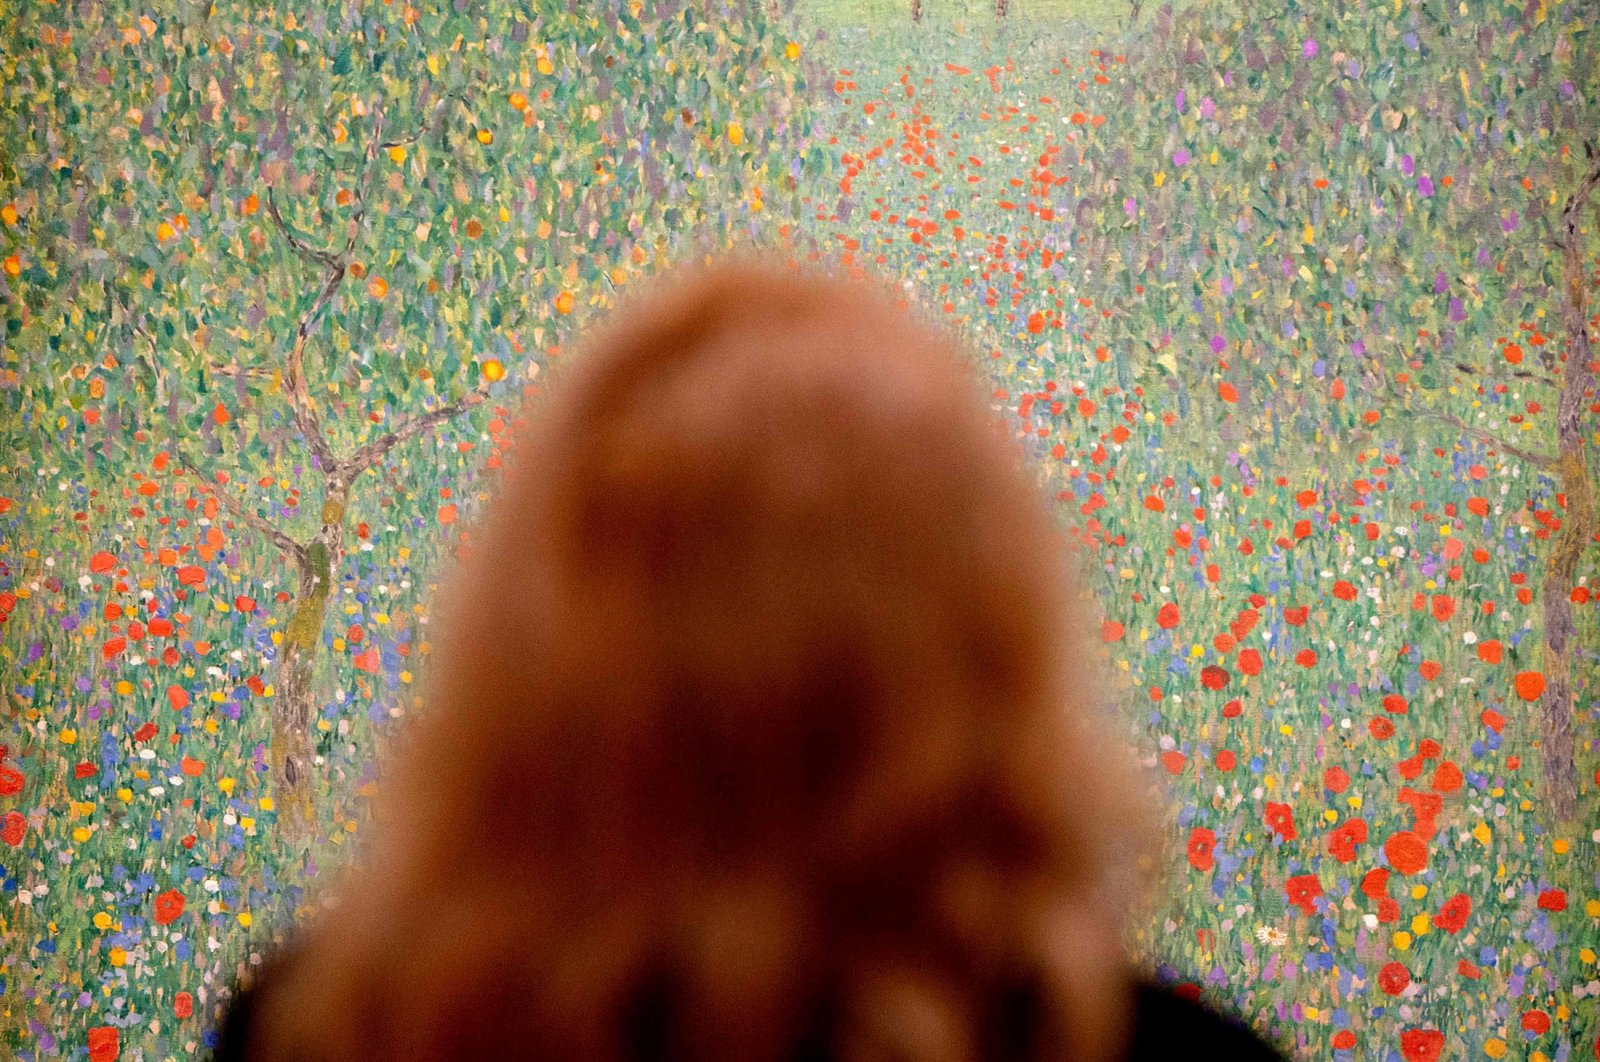 A woman looks at the painting &quot;Field of Poppies&quot; (1907) by Austrian painter Gustav Klimt, during a preview of an exhibition in Vienna, Austria, Feb. 2, 2023. (AFP Photo)